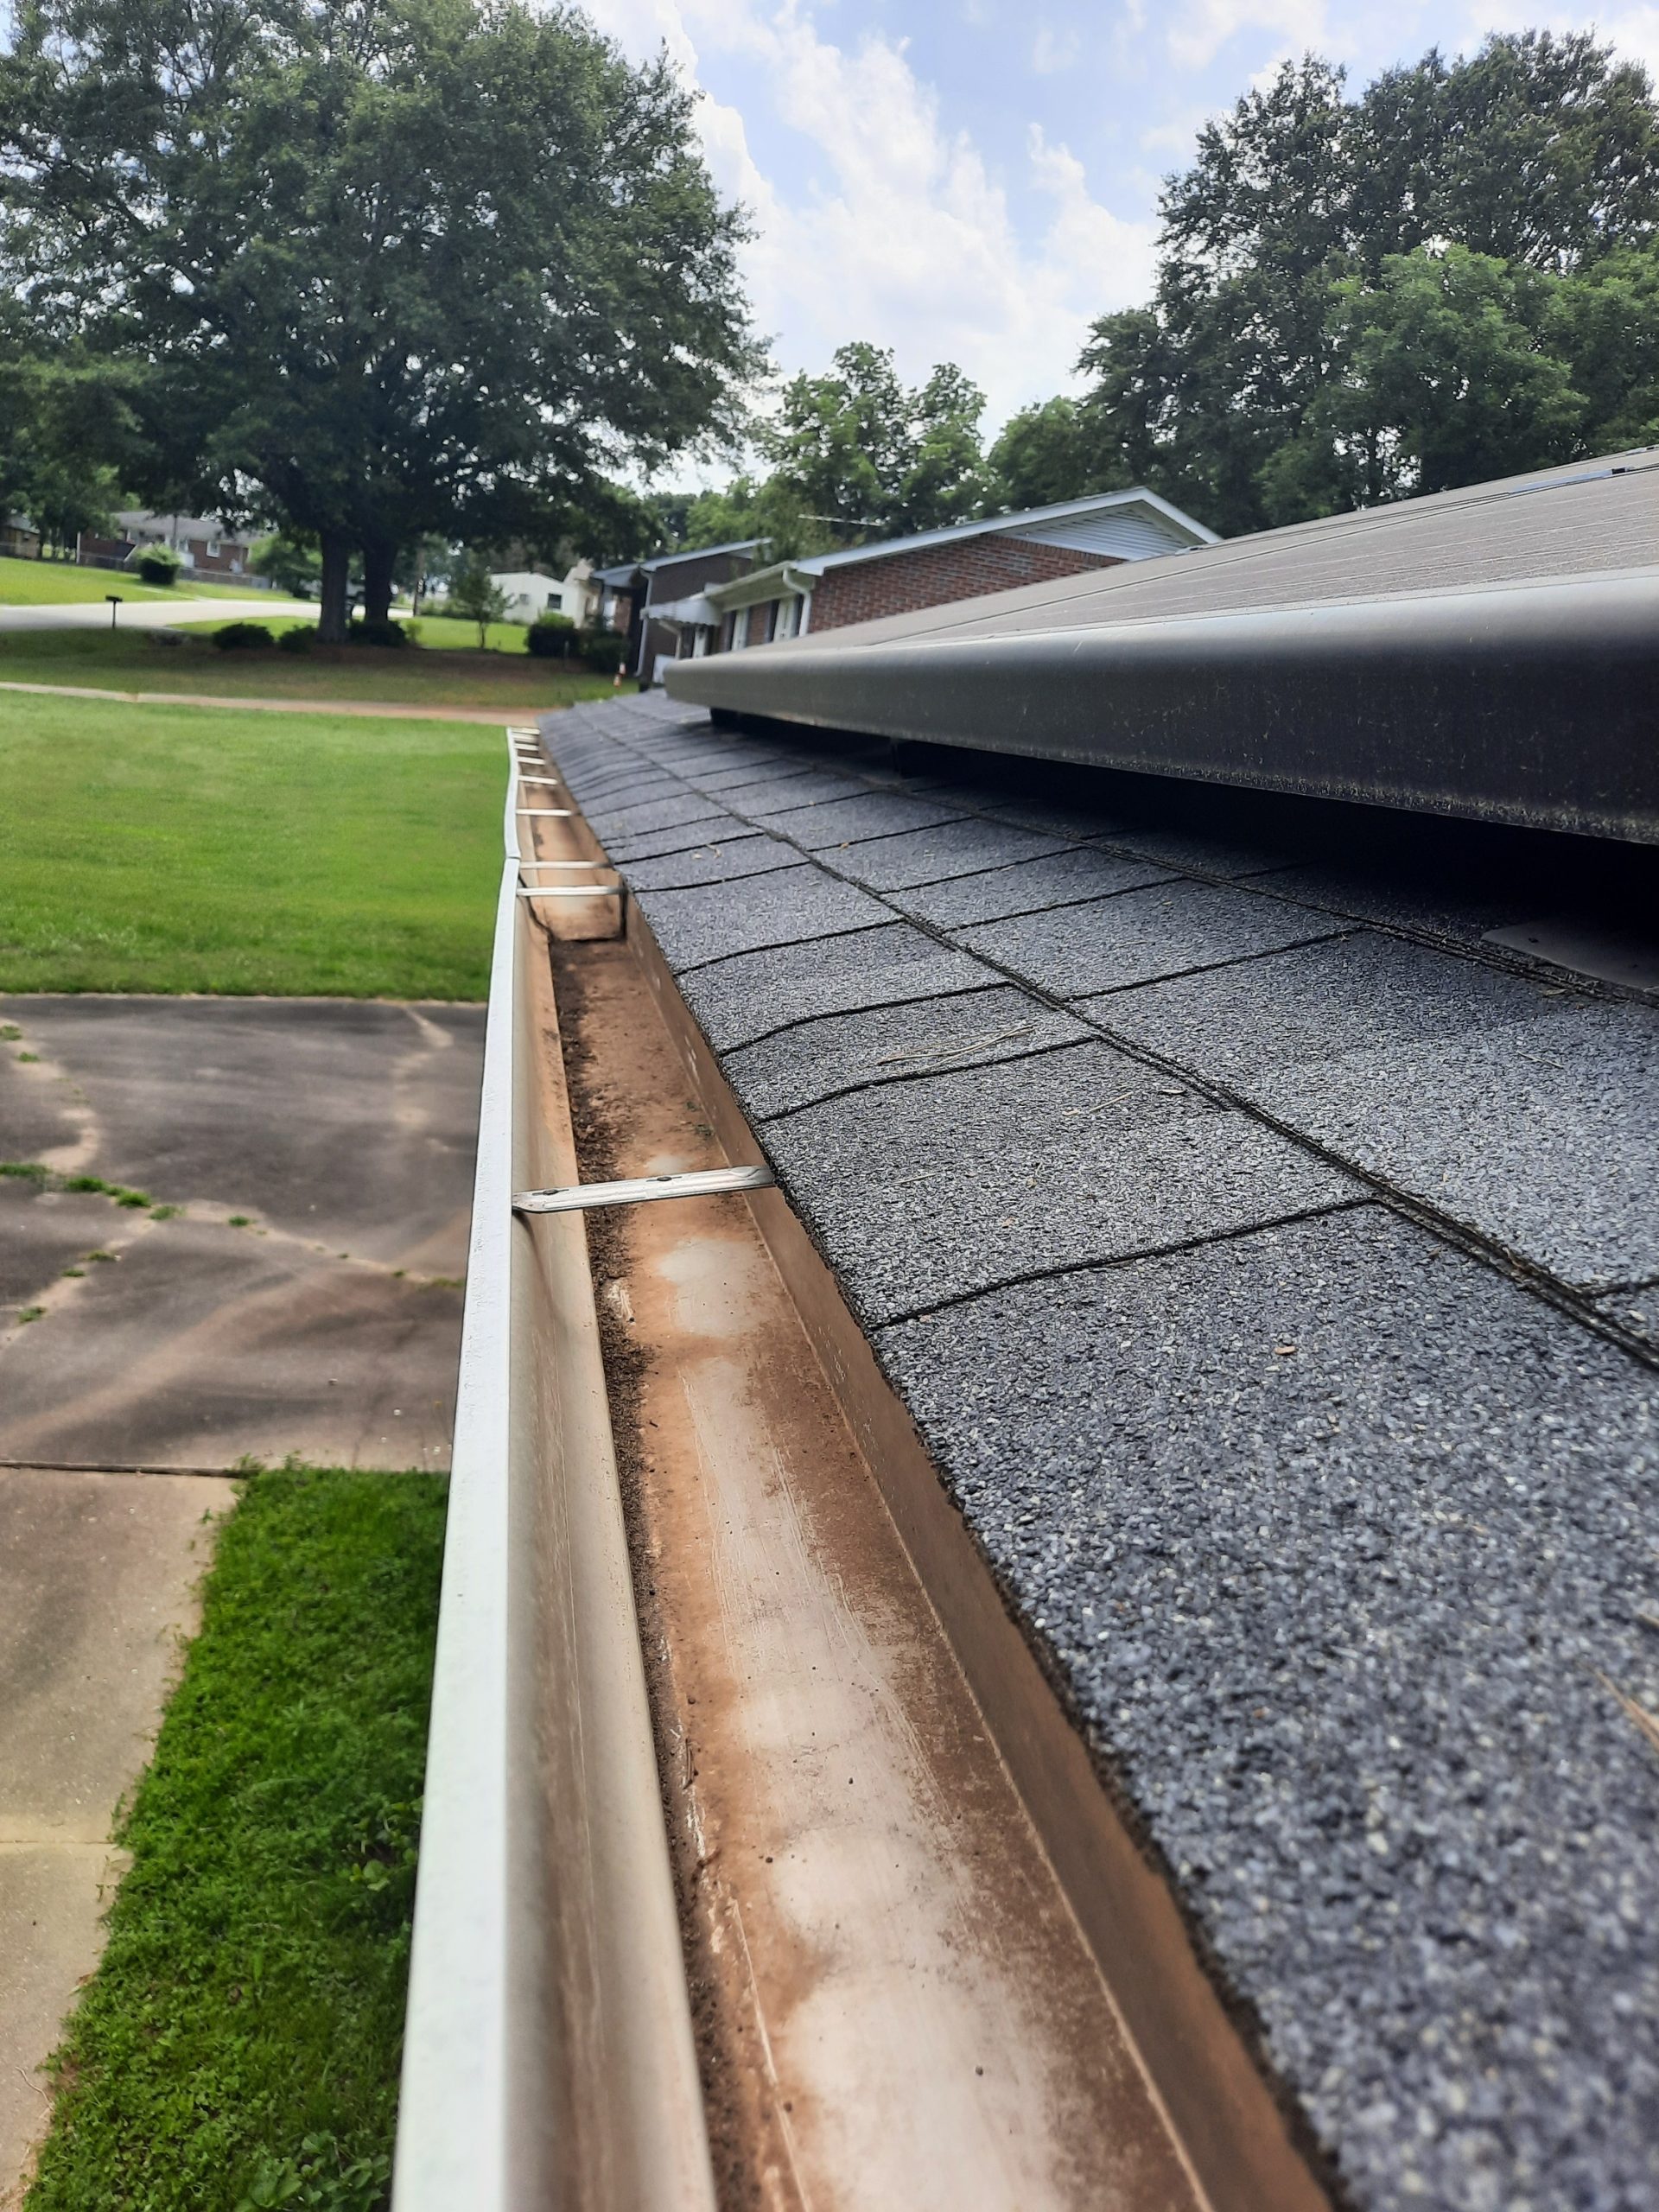 Completed Gutter Cleaning in Overland Park, KS for Julian's Home